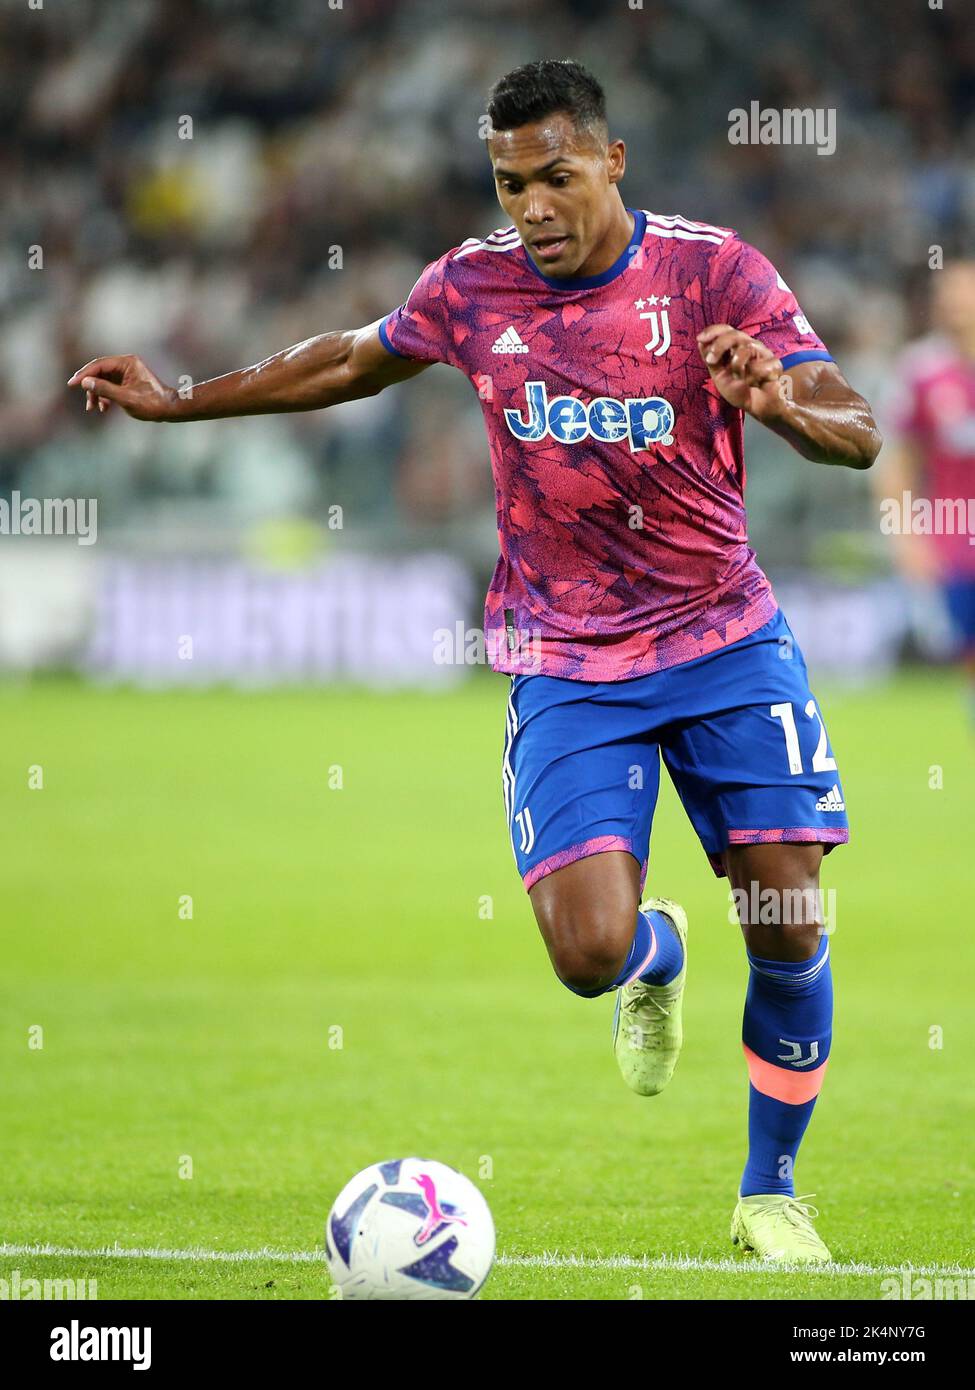 Turin, Italy. 02nd Oct, 2022. Alex Sandro Lobo Silva (Juventus FC) during Juventus FC vs Bologna FC, italian soccer Serie A match in Turin, Italy, October 02 2022 Credit: Independent Photo Agency/Alamy Live News Stock Photo